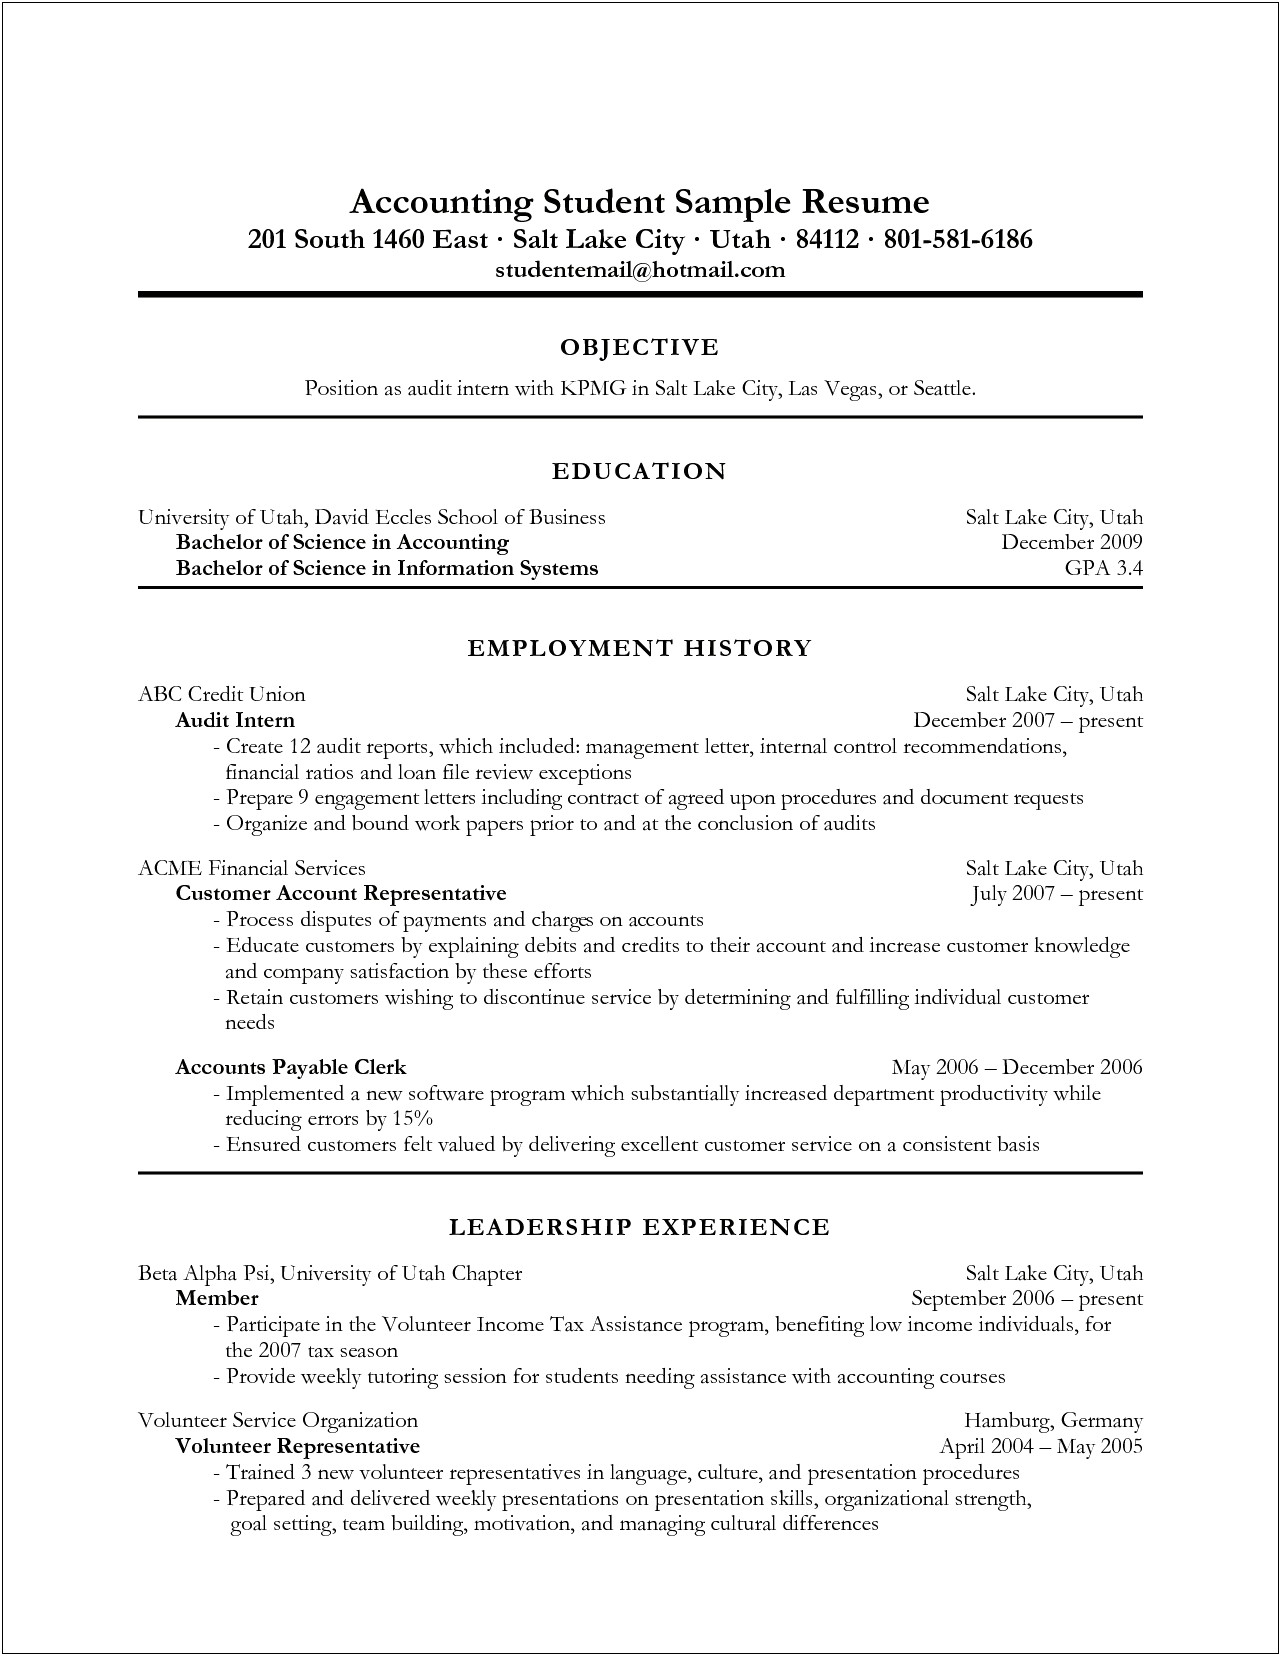 Resume Objective Statement Examples For Accounting